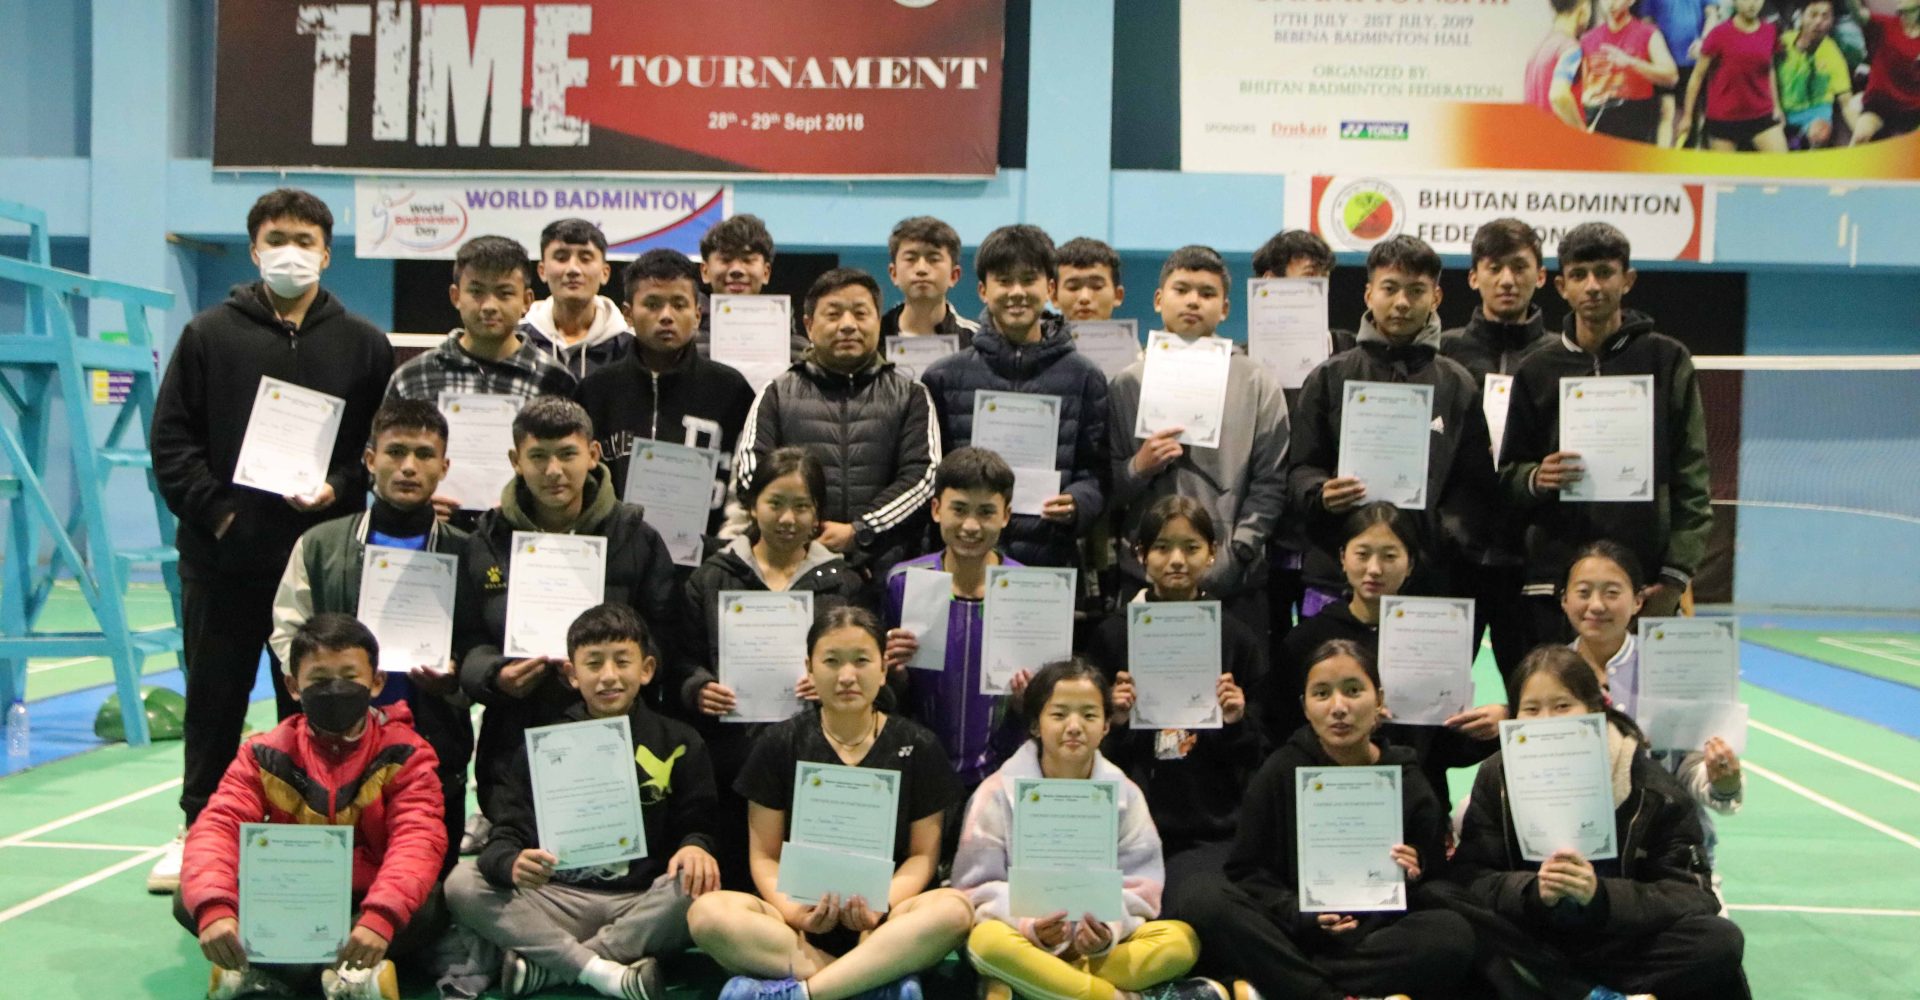 Advanced Winter Badminton Training Concludes with Competitive Tournament